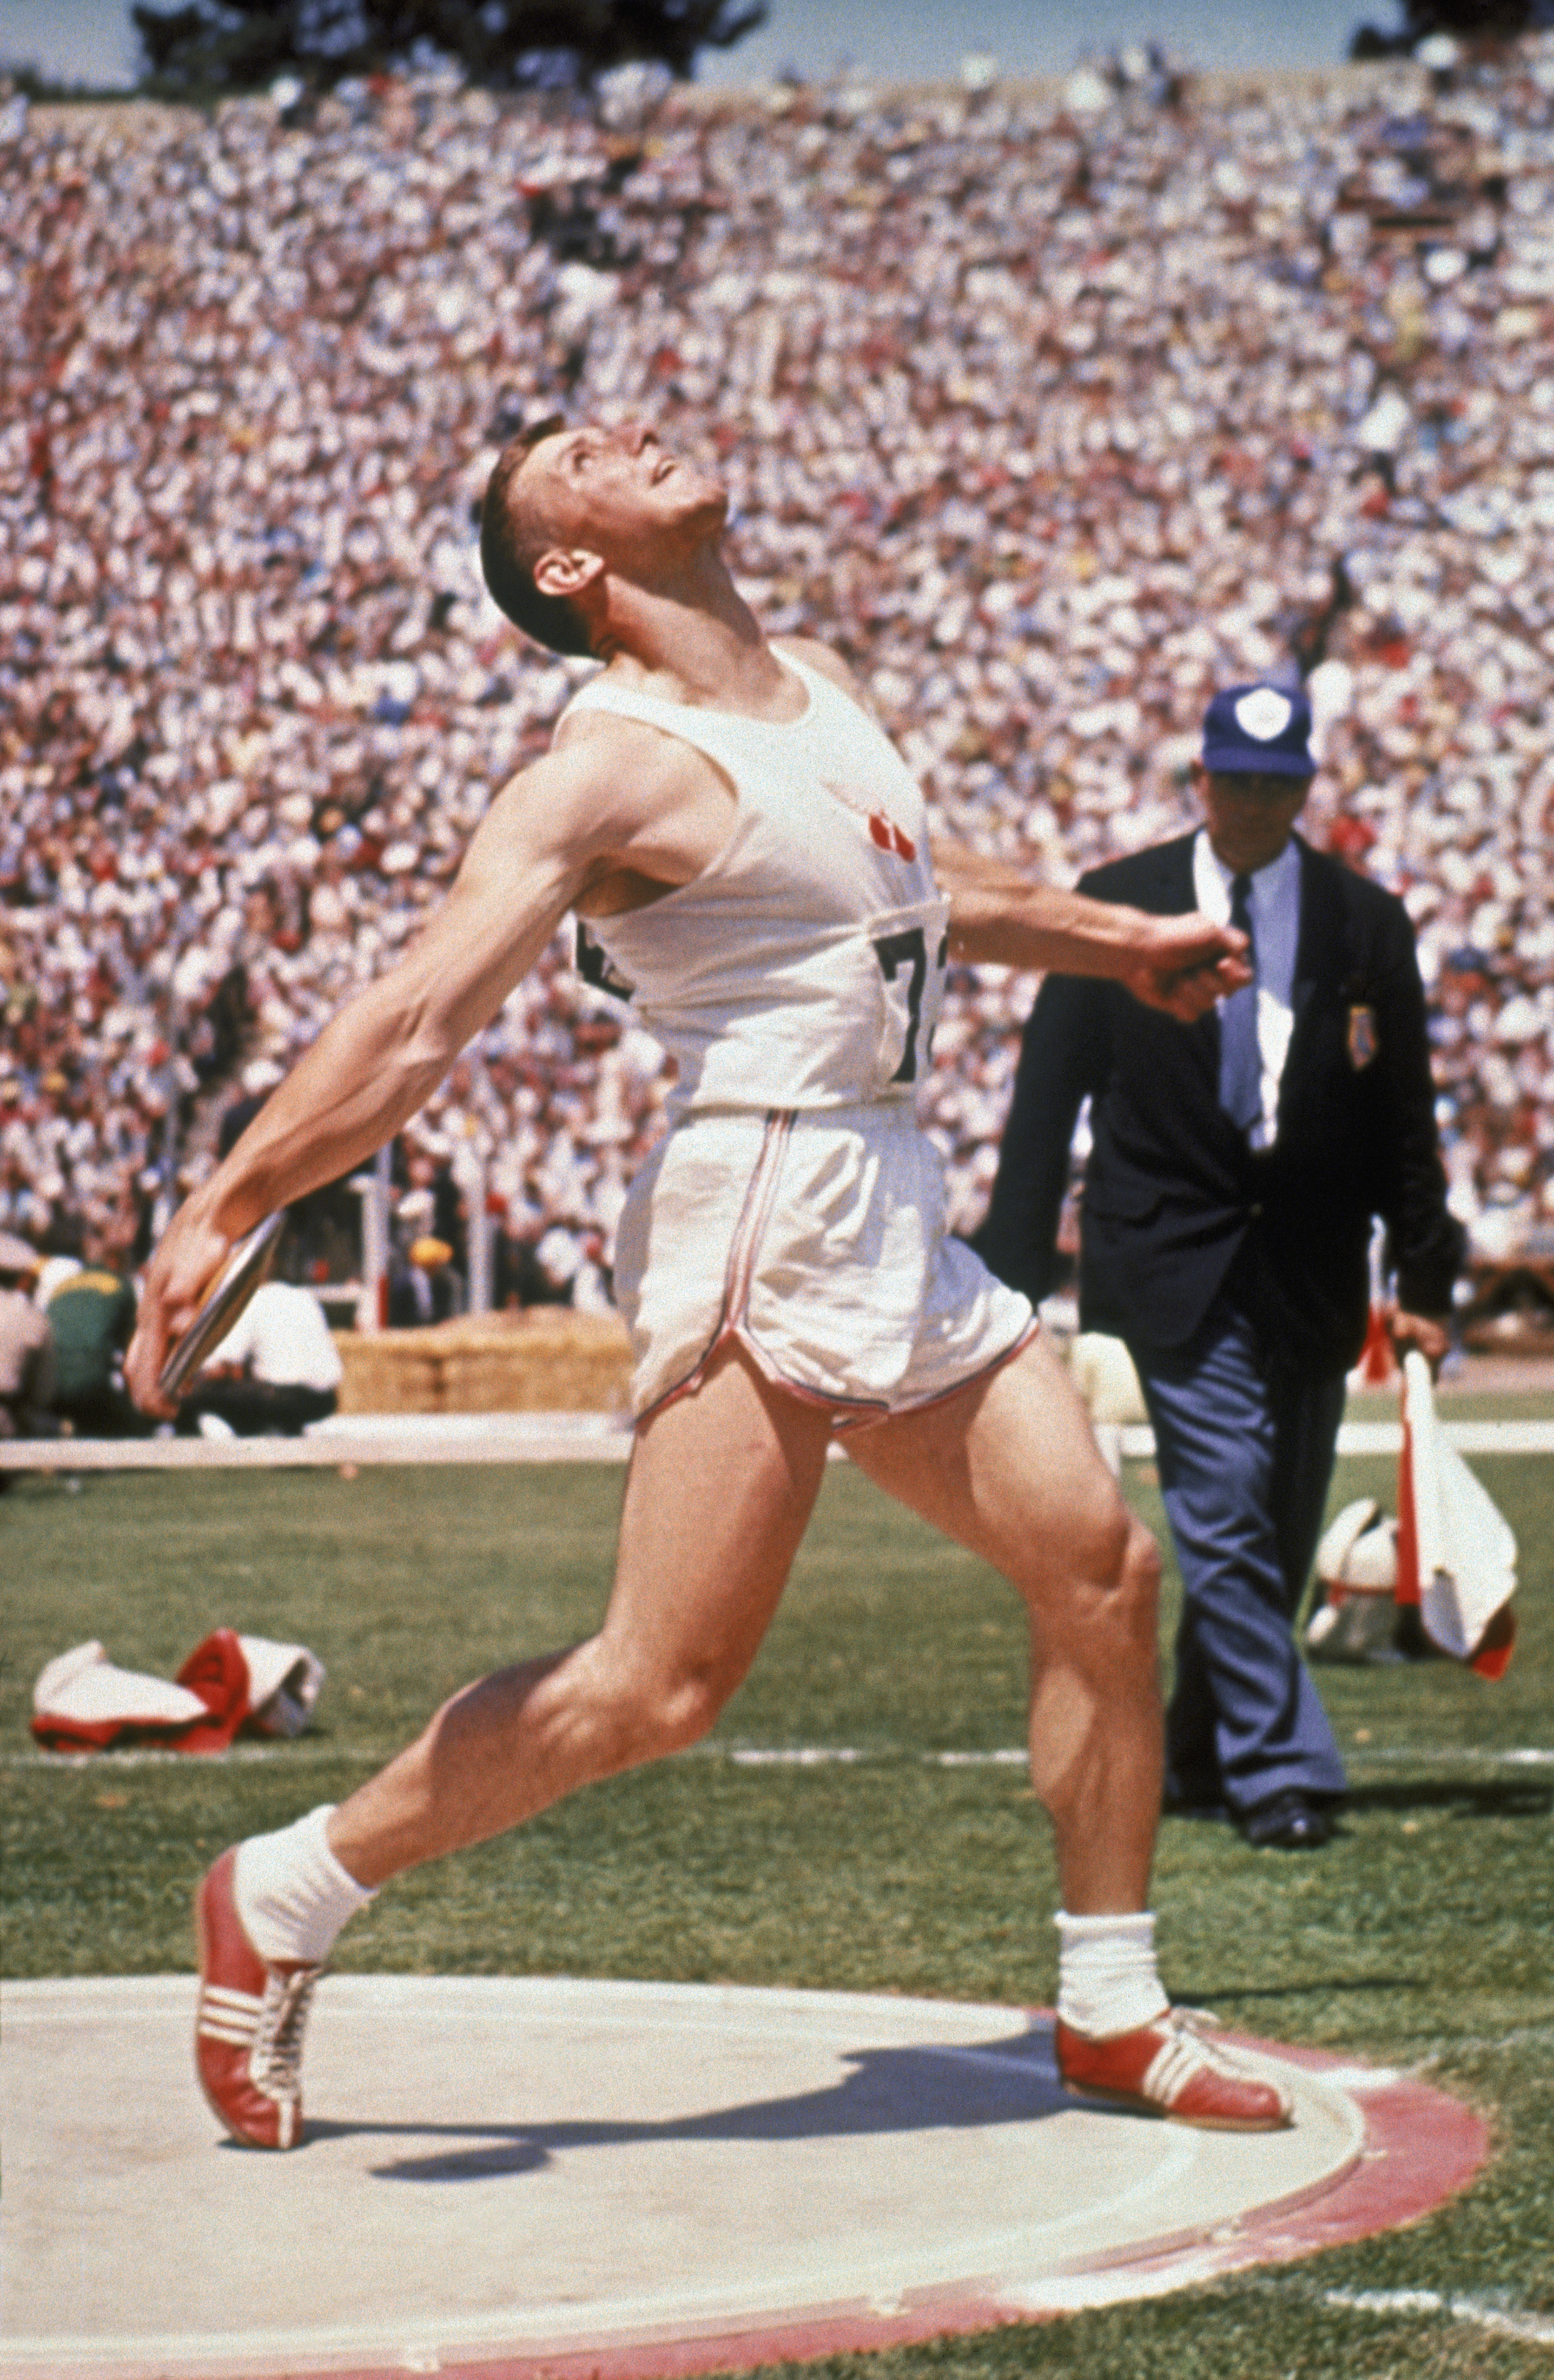 1980:  Al Oerter of the USA prepares to throw the discus for Men's Discus Track and Field event at the U.S. Team Trials for the Olympic Games.  Coming out of retirement to compete, Oerter had won the gold for discus at the 1956, 1960, 1964 and 1968 Summer